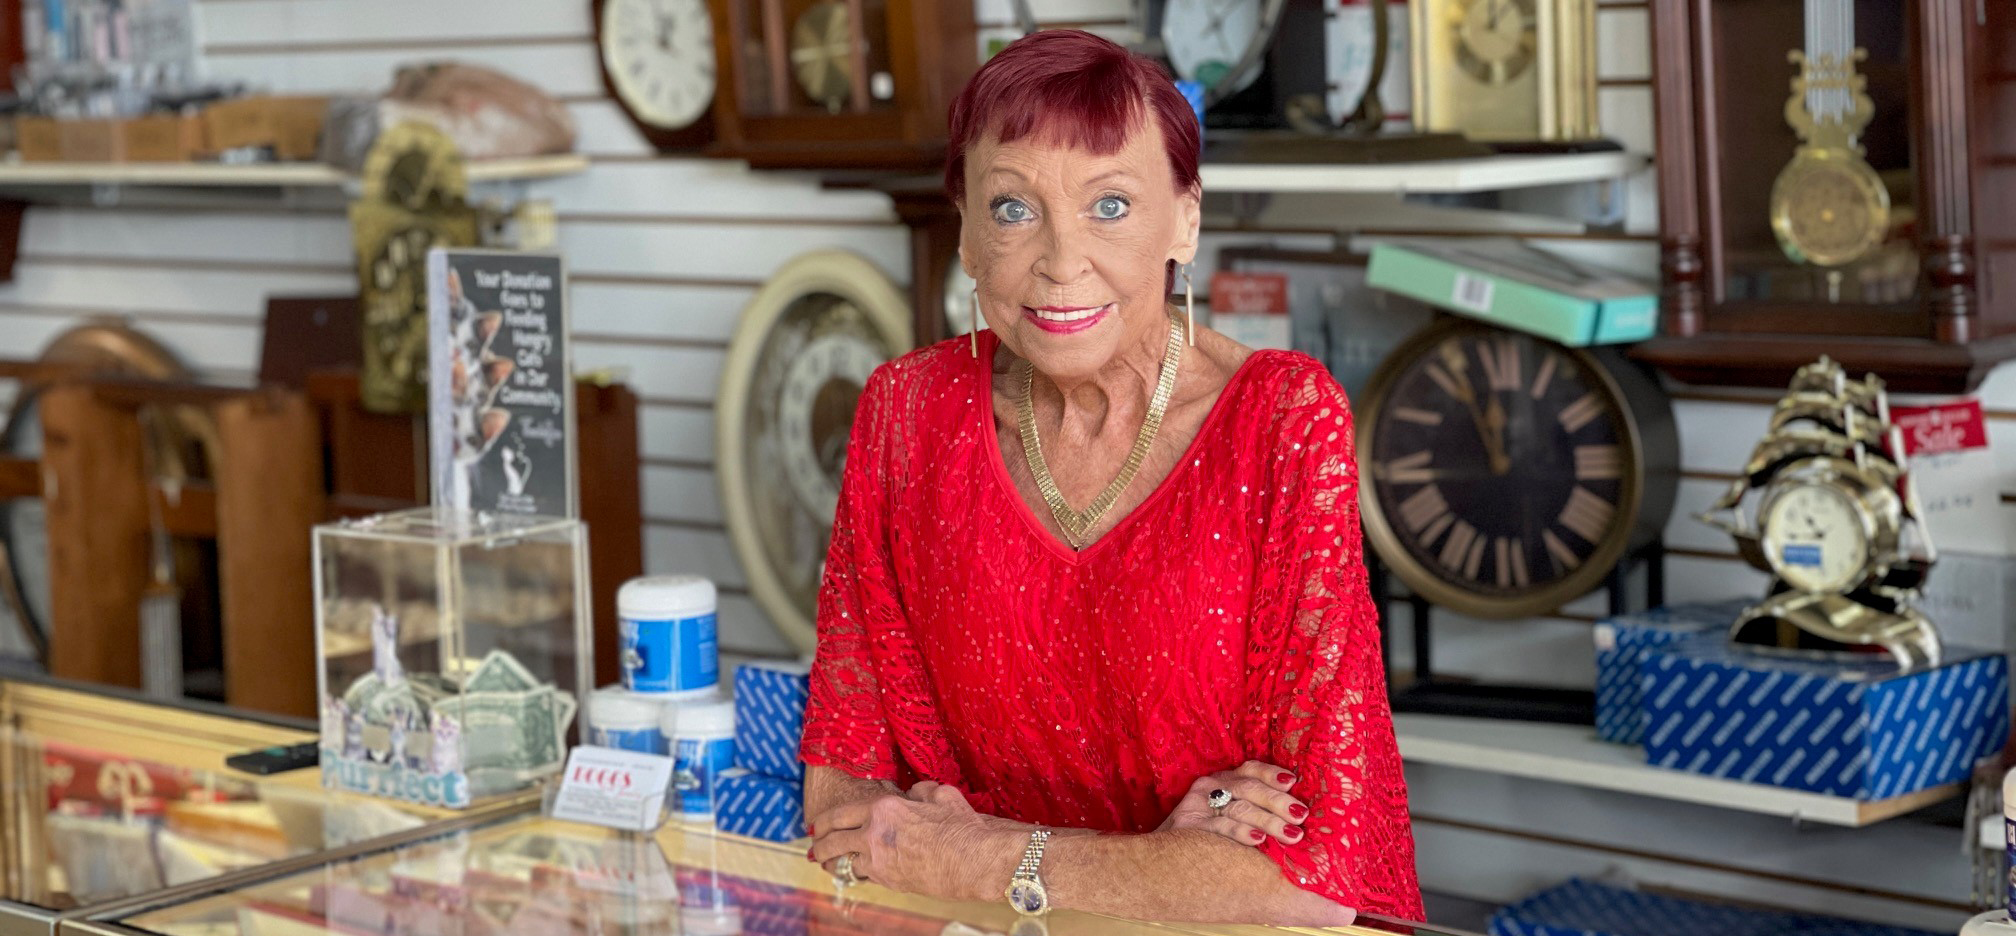 Jojo Boggs stands behind the counter of her family's jewelry store in Sun City Center, Fla.